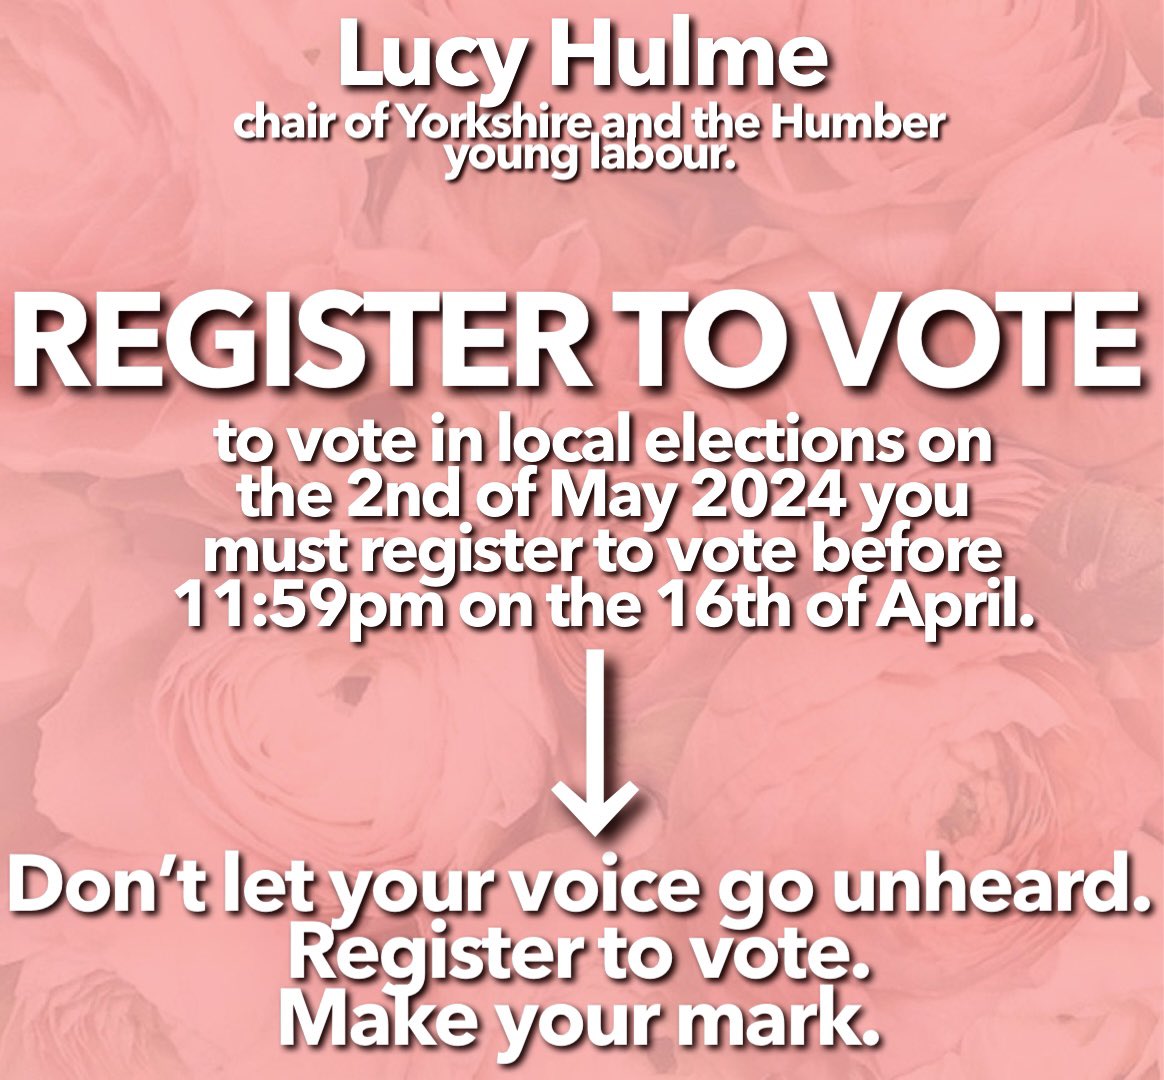 CALLING ALL YOUNG PEOPLE! Over 18? Make sure you are registered to vote in the local elections happening on May the 2nd 2024. Be the voice of your generation. Make your mark. Register to vote. gov.uk/register-to-vo…